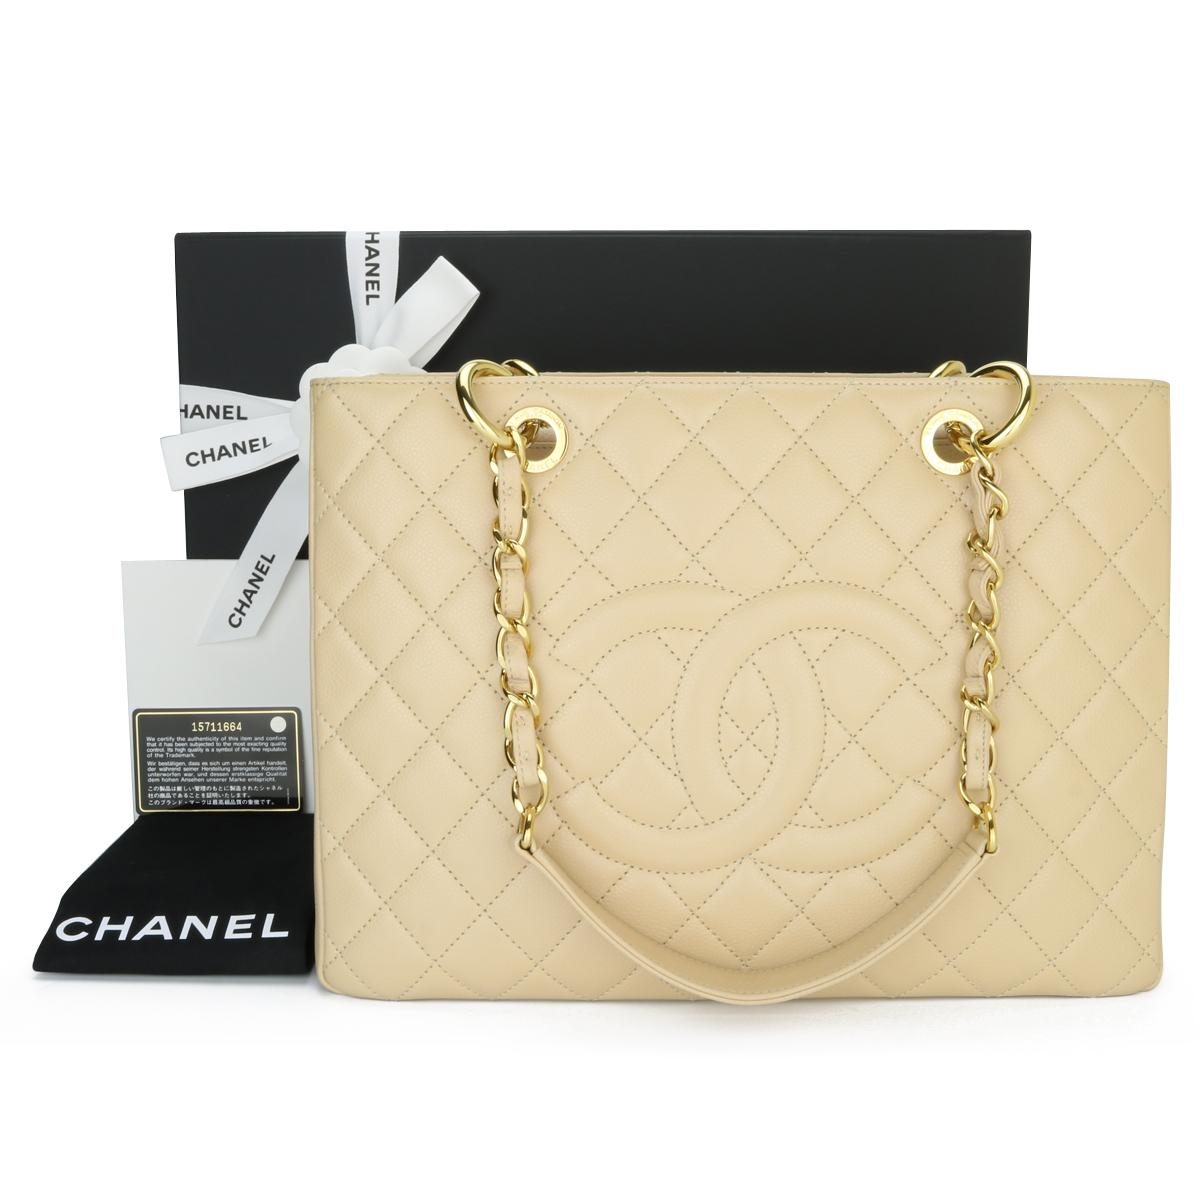 CHANEL Grand Shopping Tote (GST) Beige Caviar with Gold Hardware 2011.

This bag is in excellent condition, the bag still holds its original shape, and the hardware is still very shiny.

As Chanel has discontinued the Grand Shopping Tote (GST), it